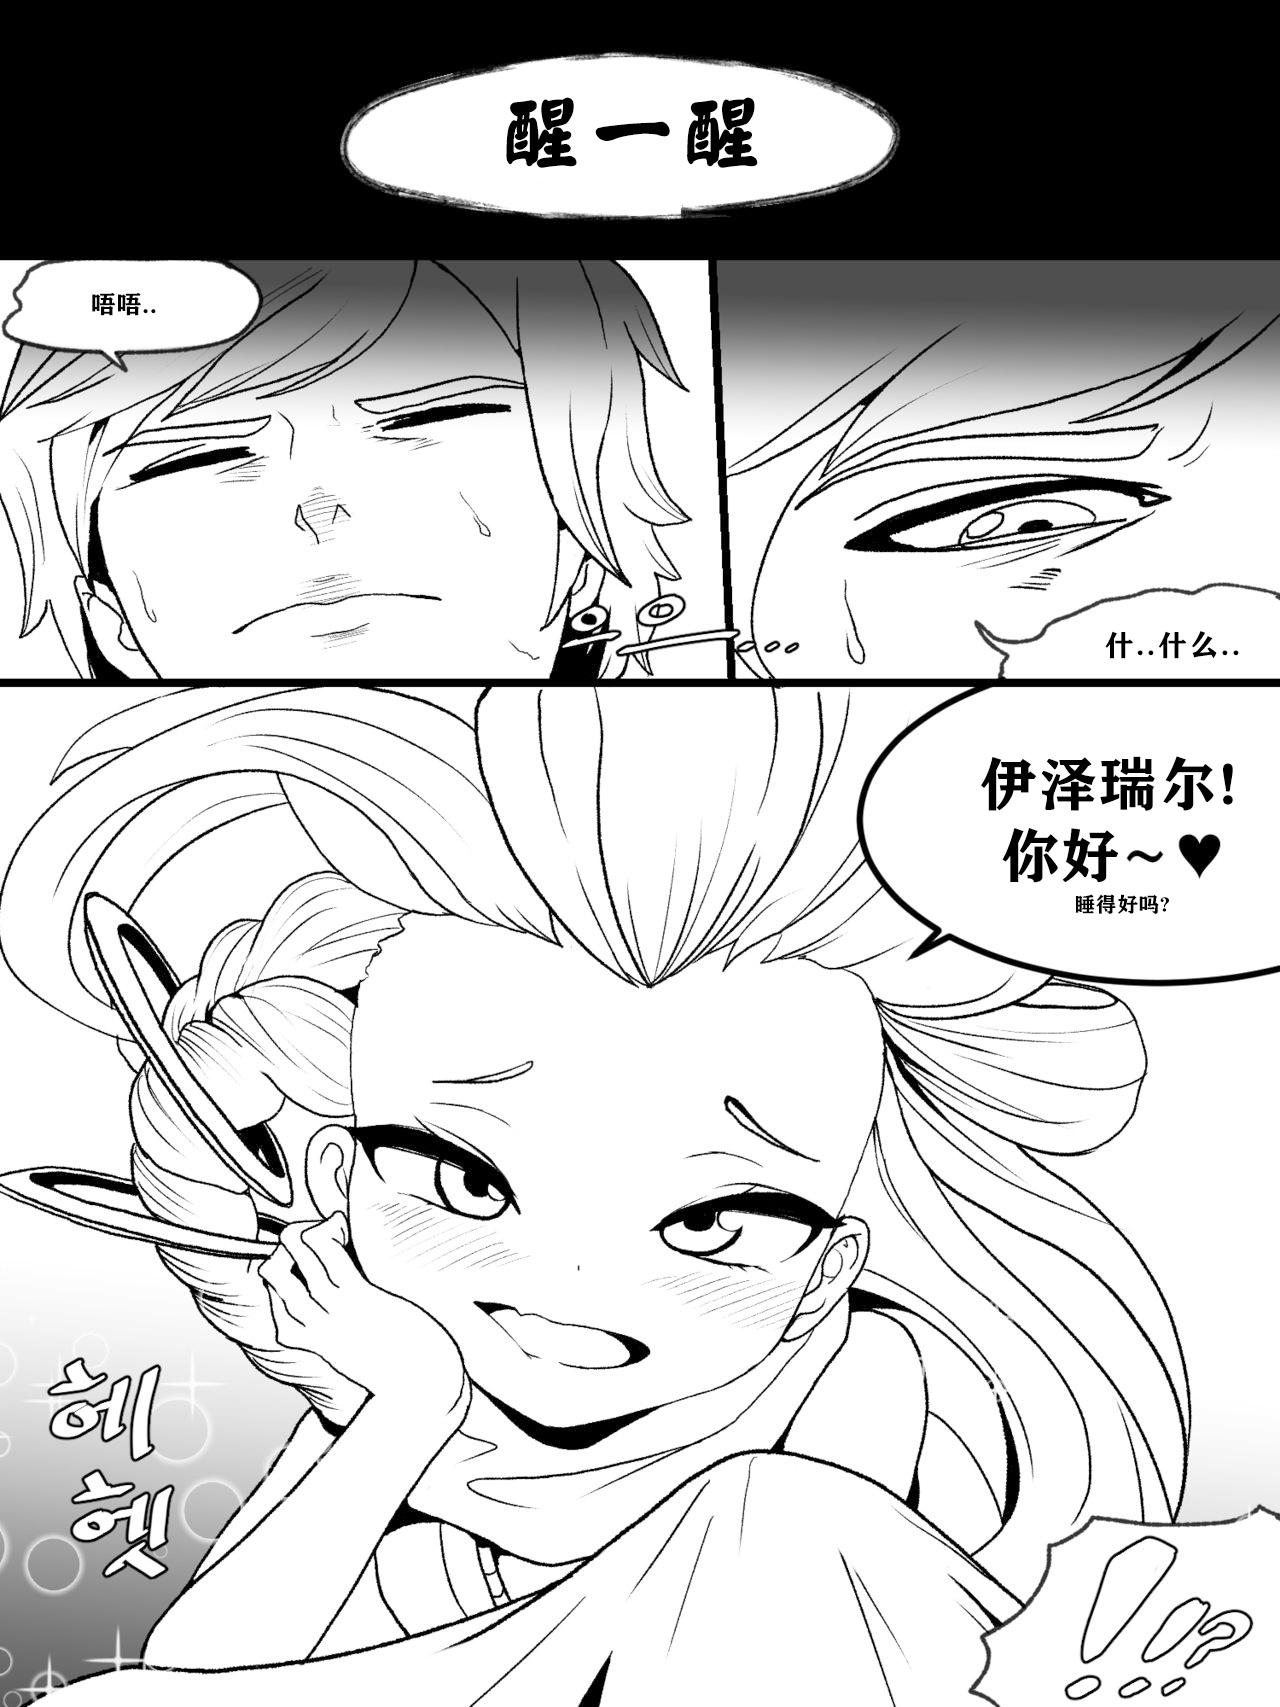 Women Fucking The reality in the starlight | 星光中的真实 - League of legends Gostosa - Page 4